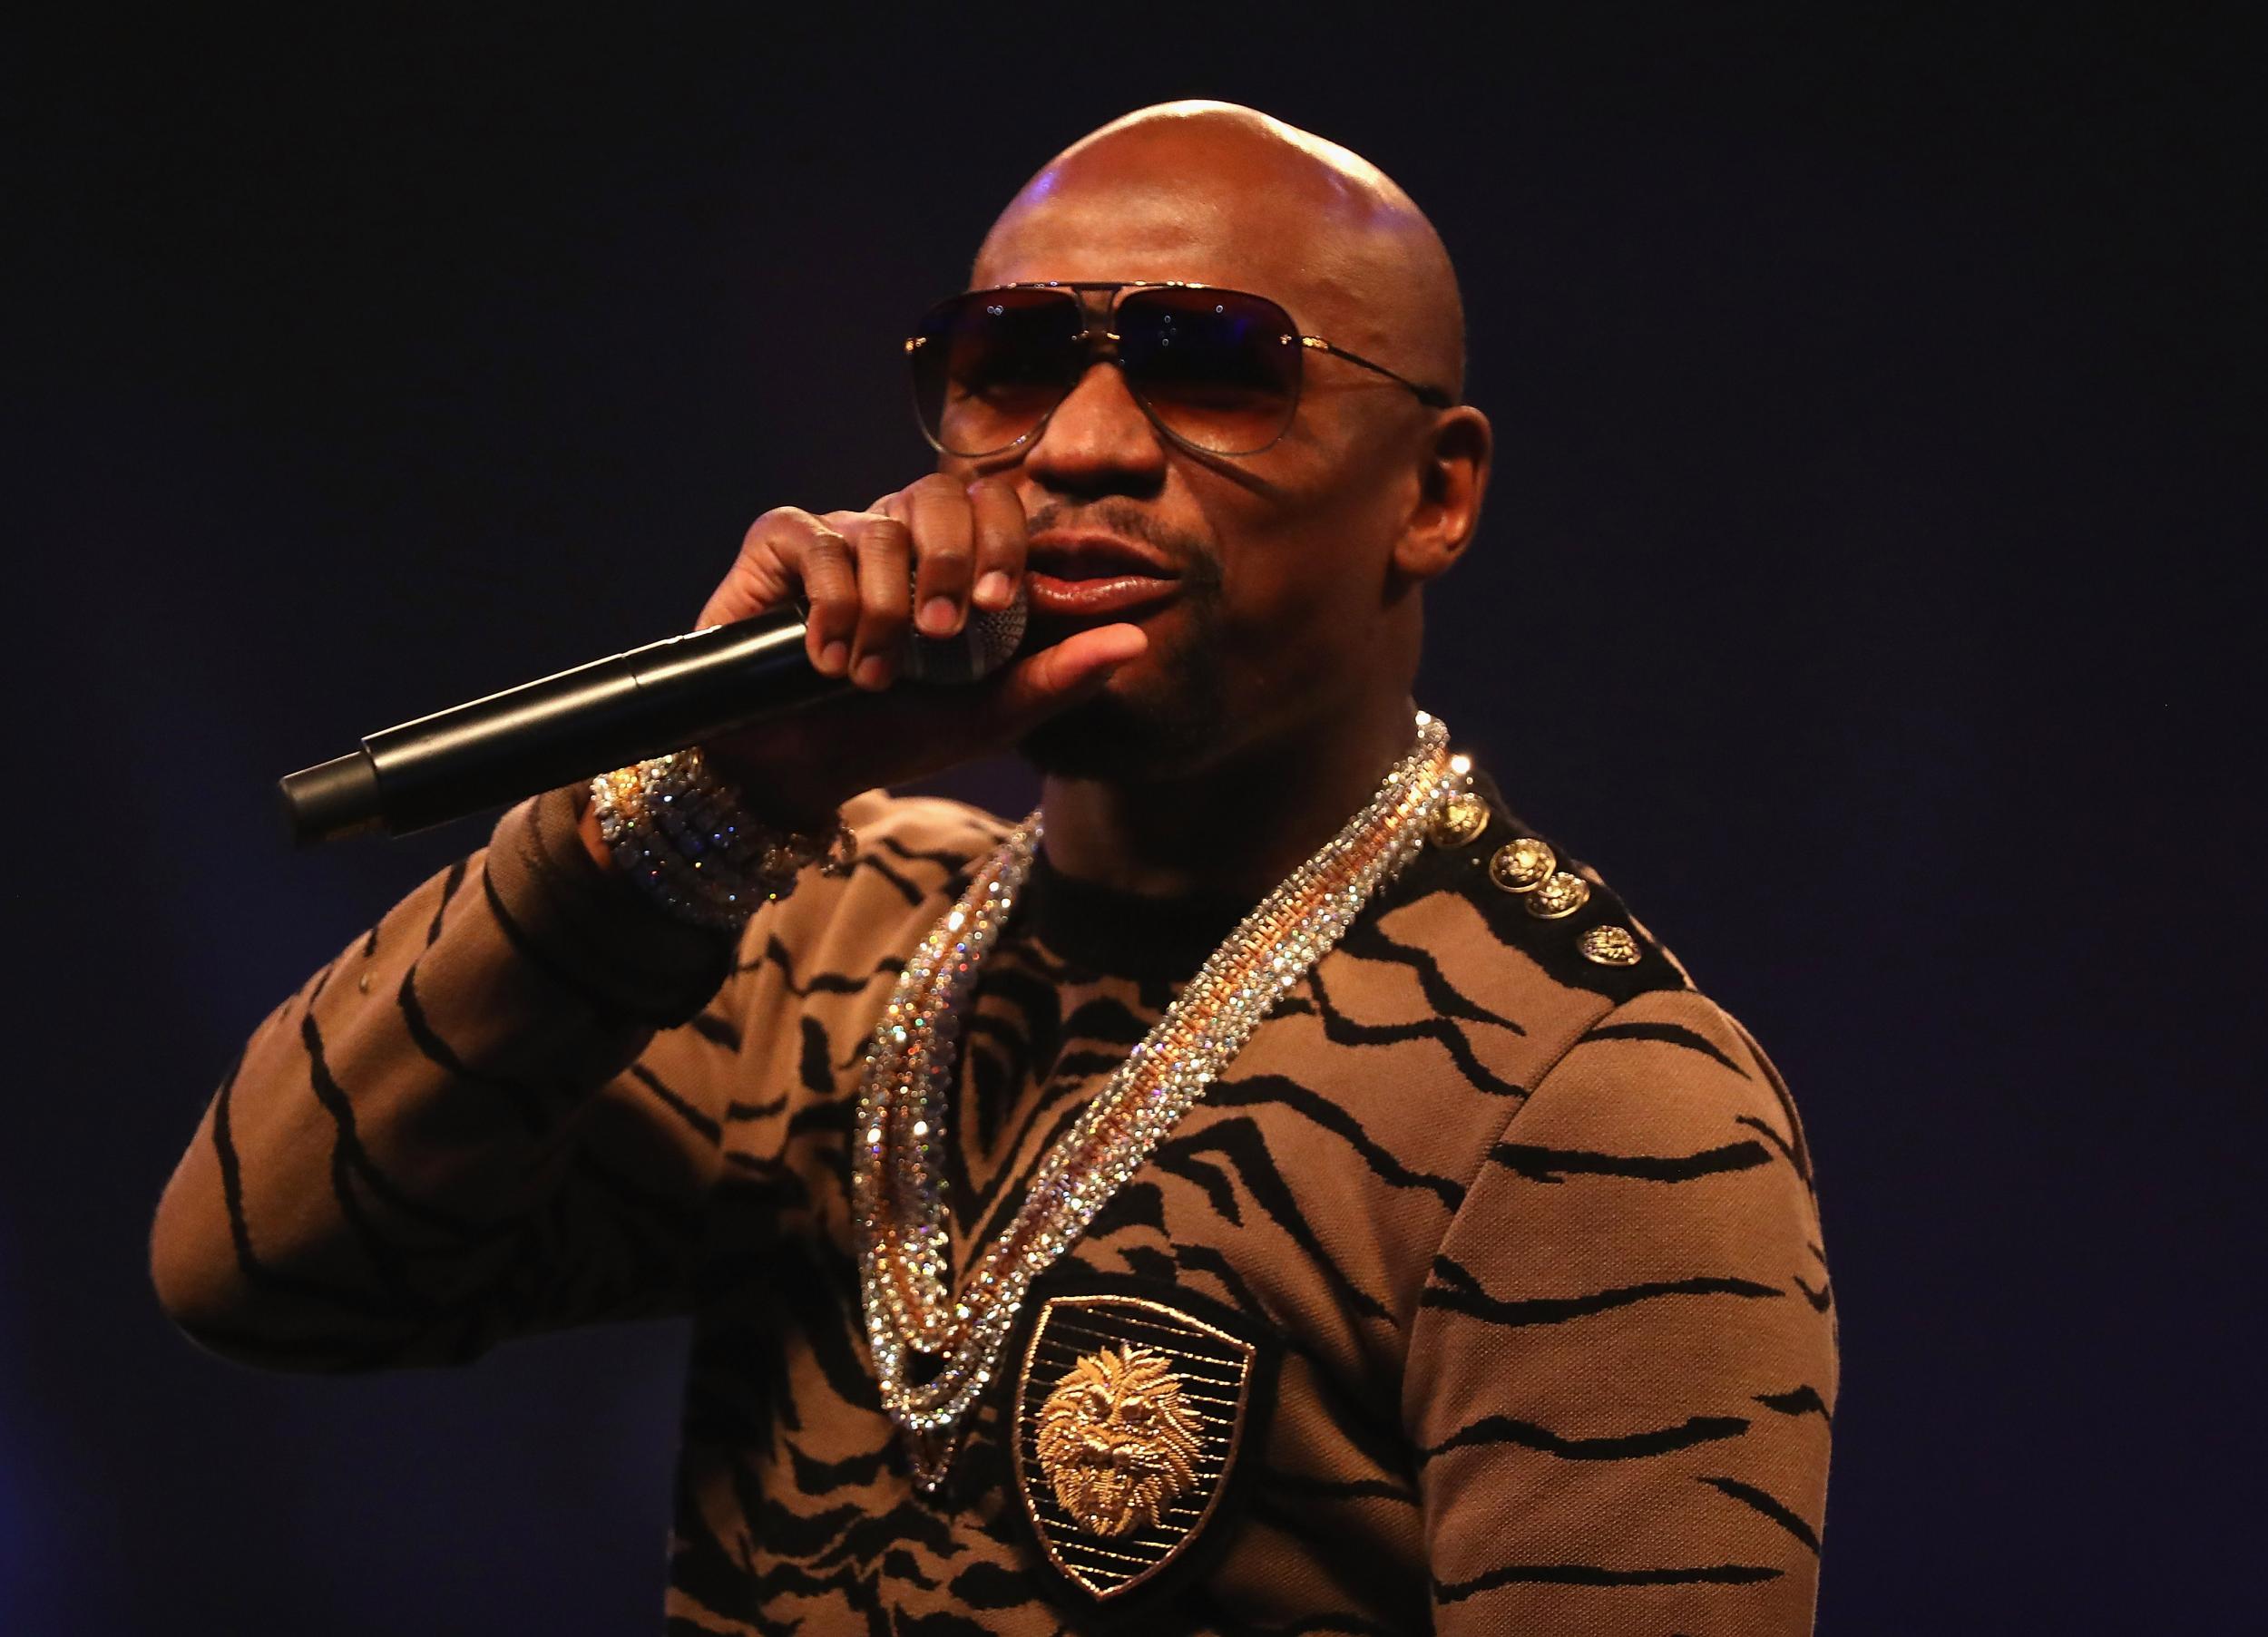 Mayweather was loudly booed in London